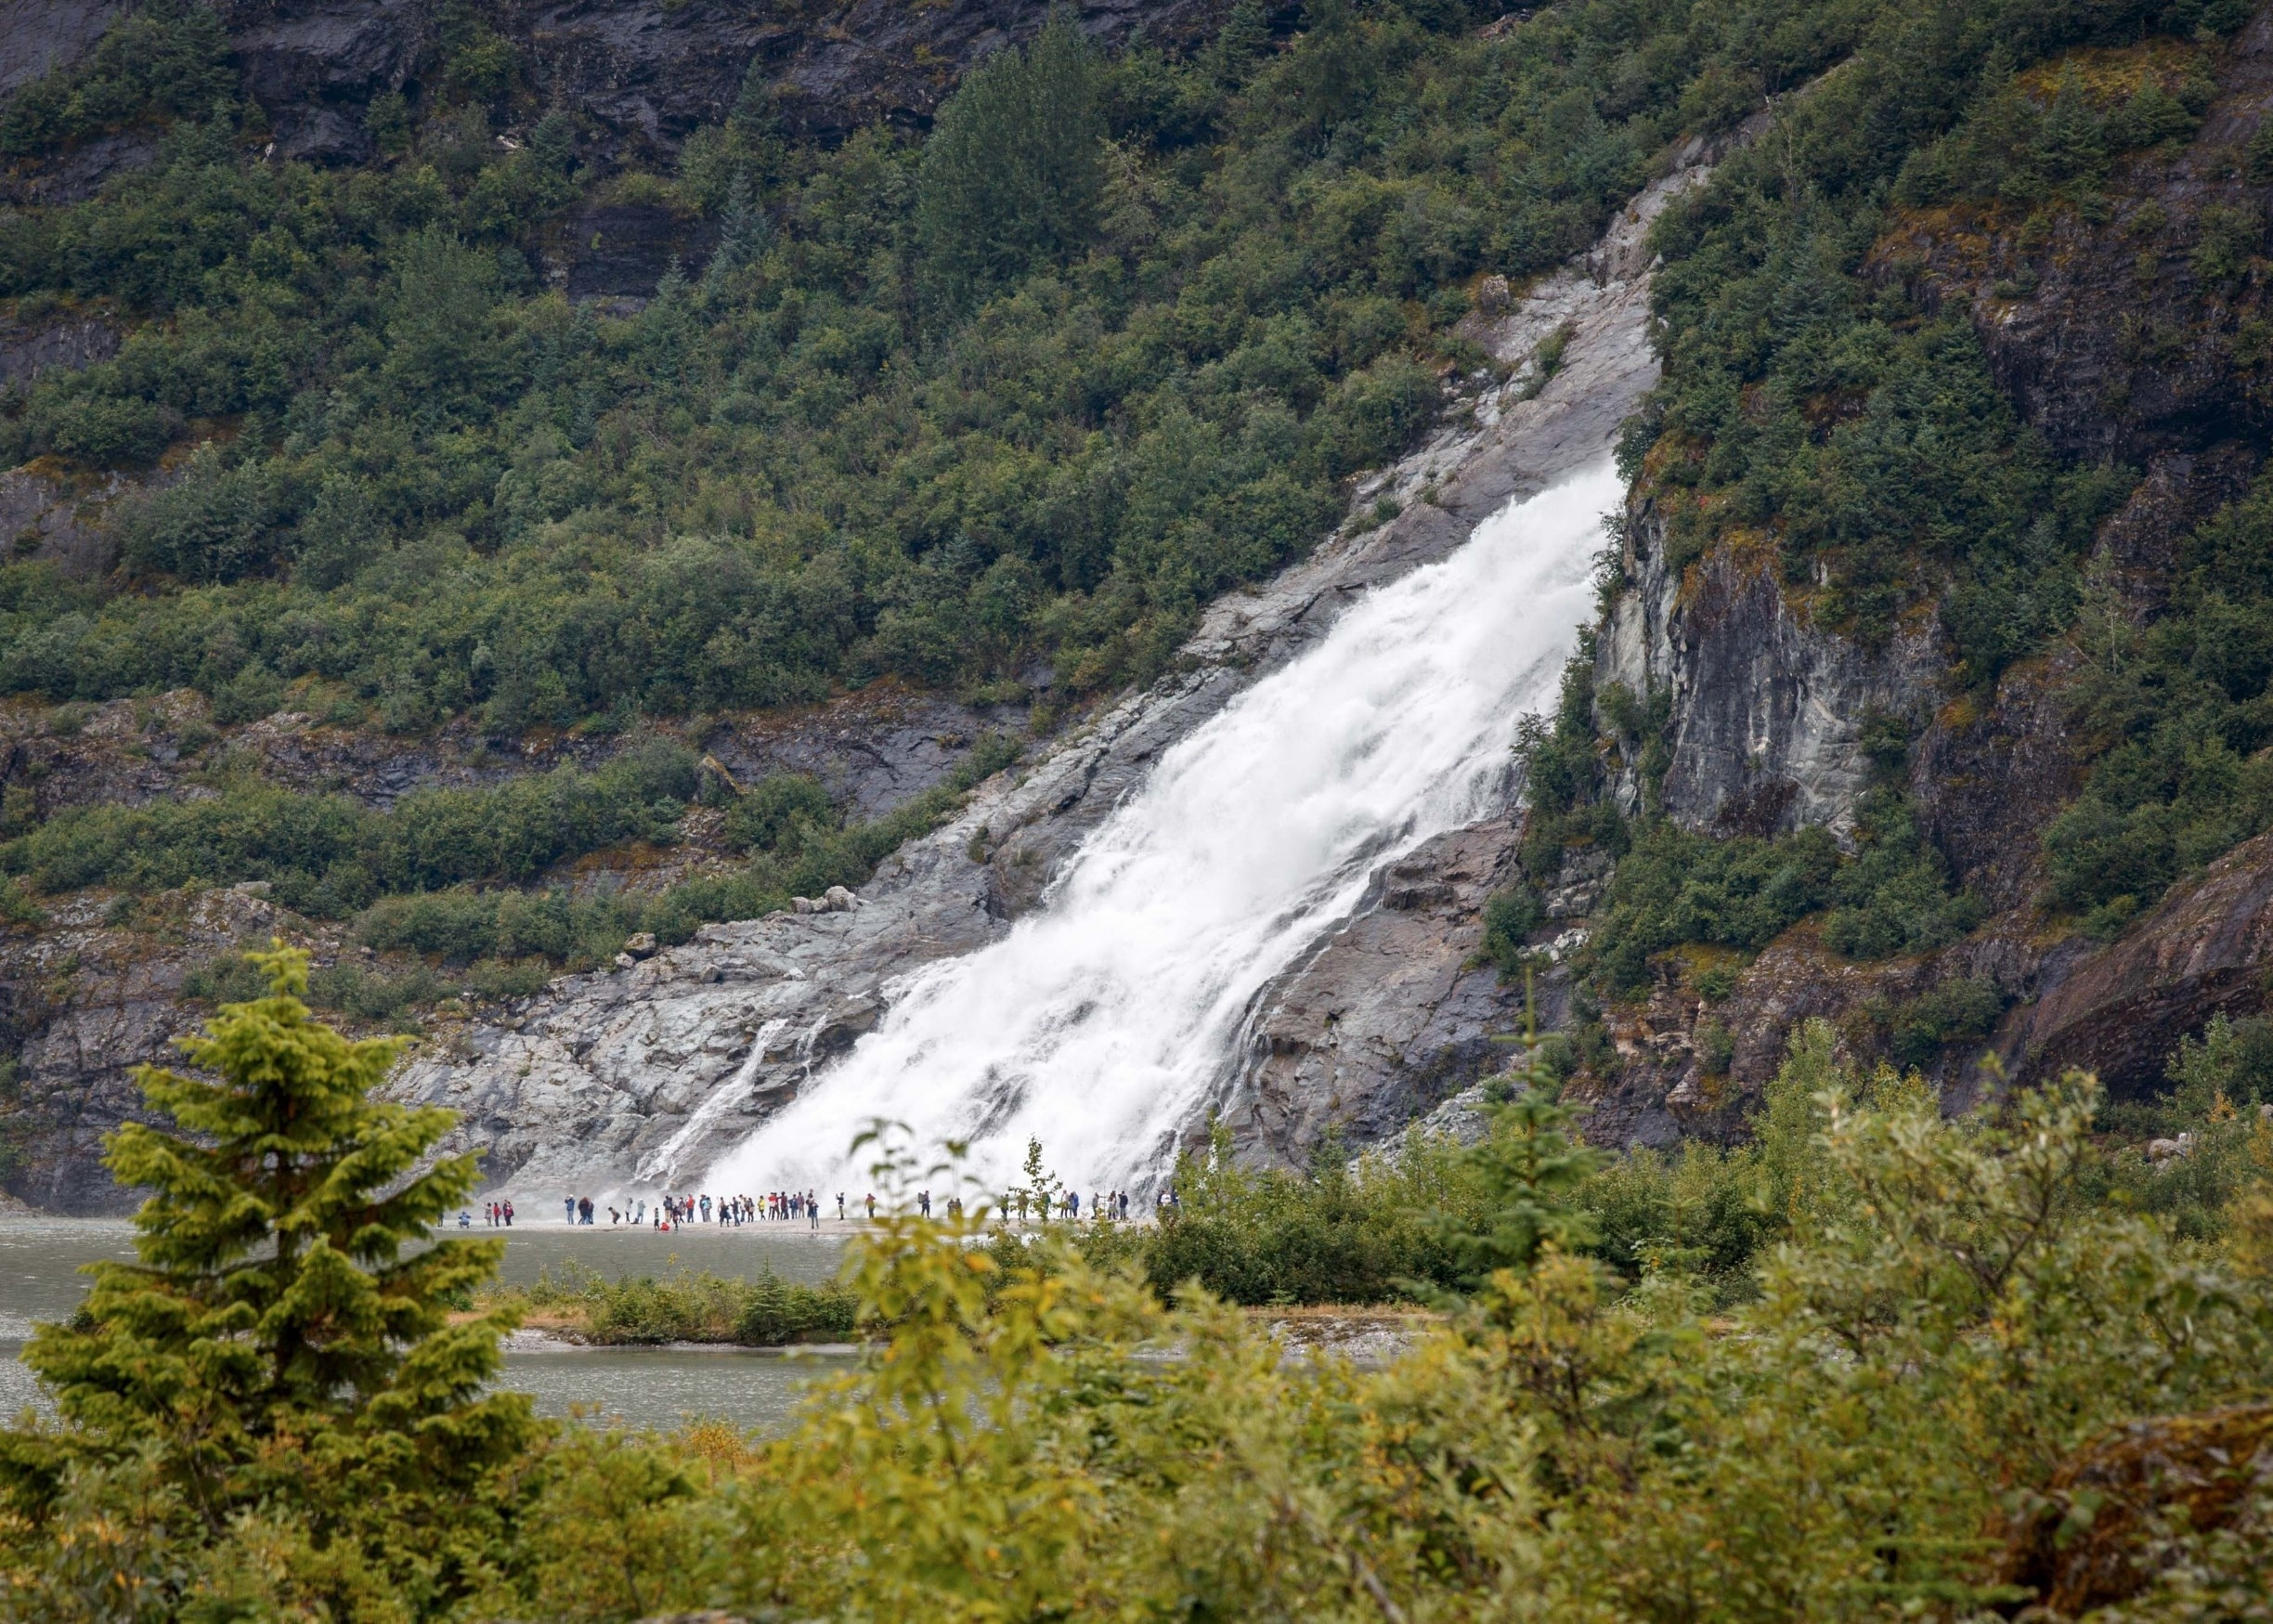 If you're in Juneau Alaska, I'm sure you will visit Mendenhall Glacier National Park. This is a pic of Nuggett Falls from a distance with all the visitors in the front to give a perspective of the power and size of the Falls. Be prepared for crowds if you're there in the summer.  